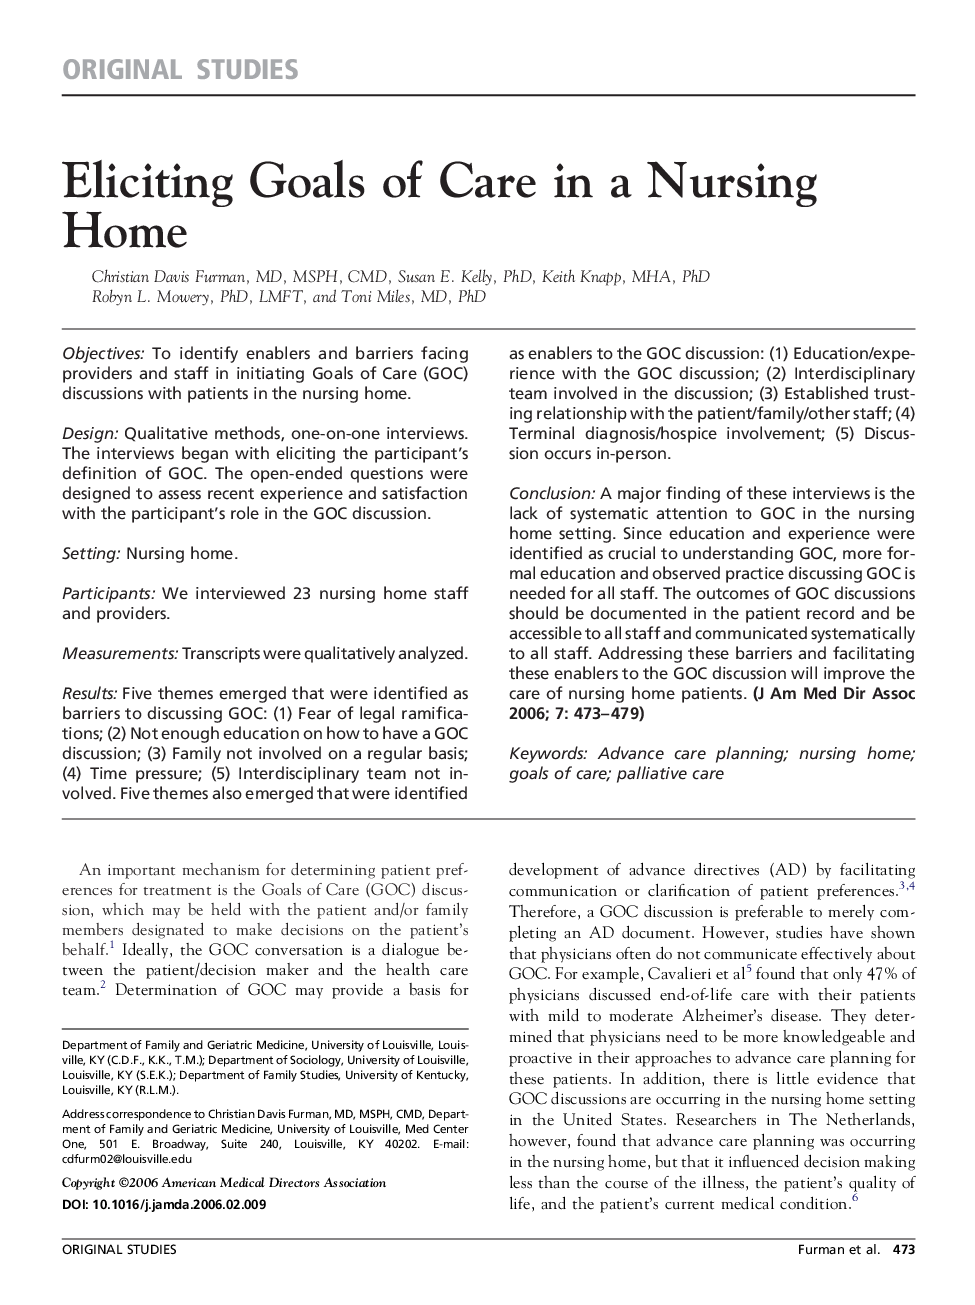 Eliciting Goals of Care in a Nursing Home